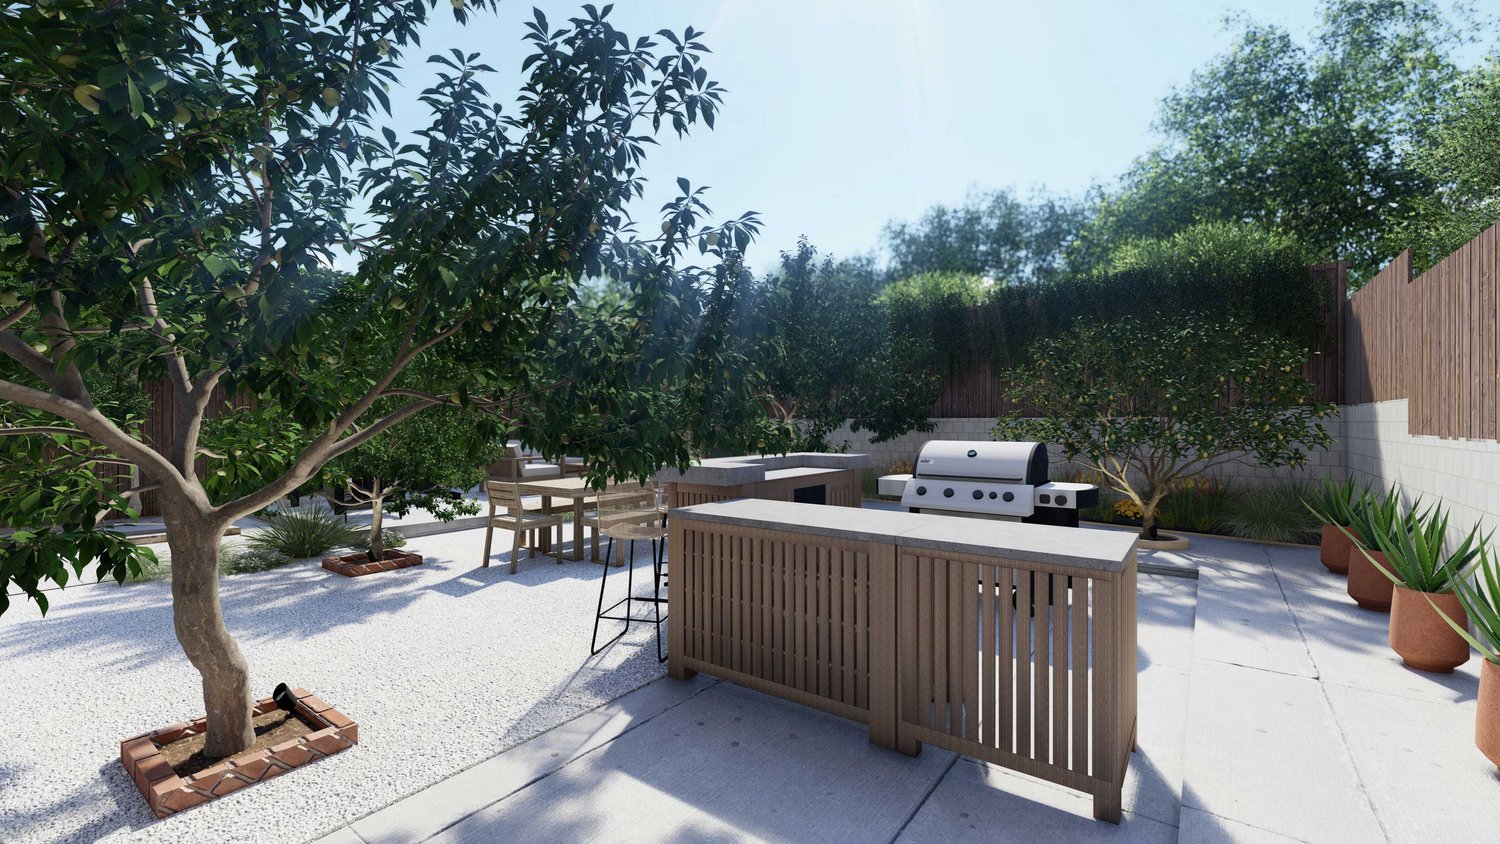 Los Angeles fenced backyard kitchen area with dining set in the background, planters and trees